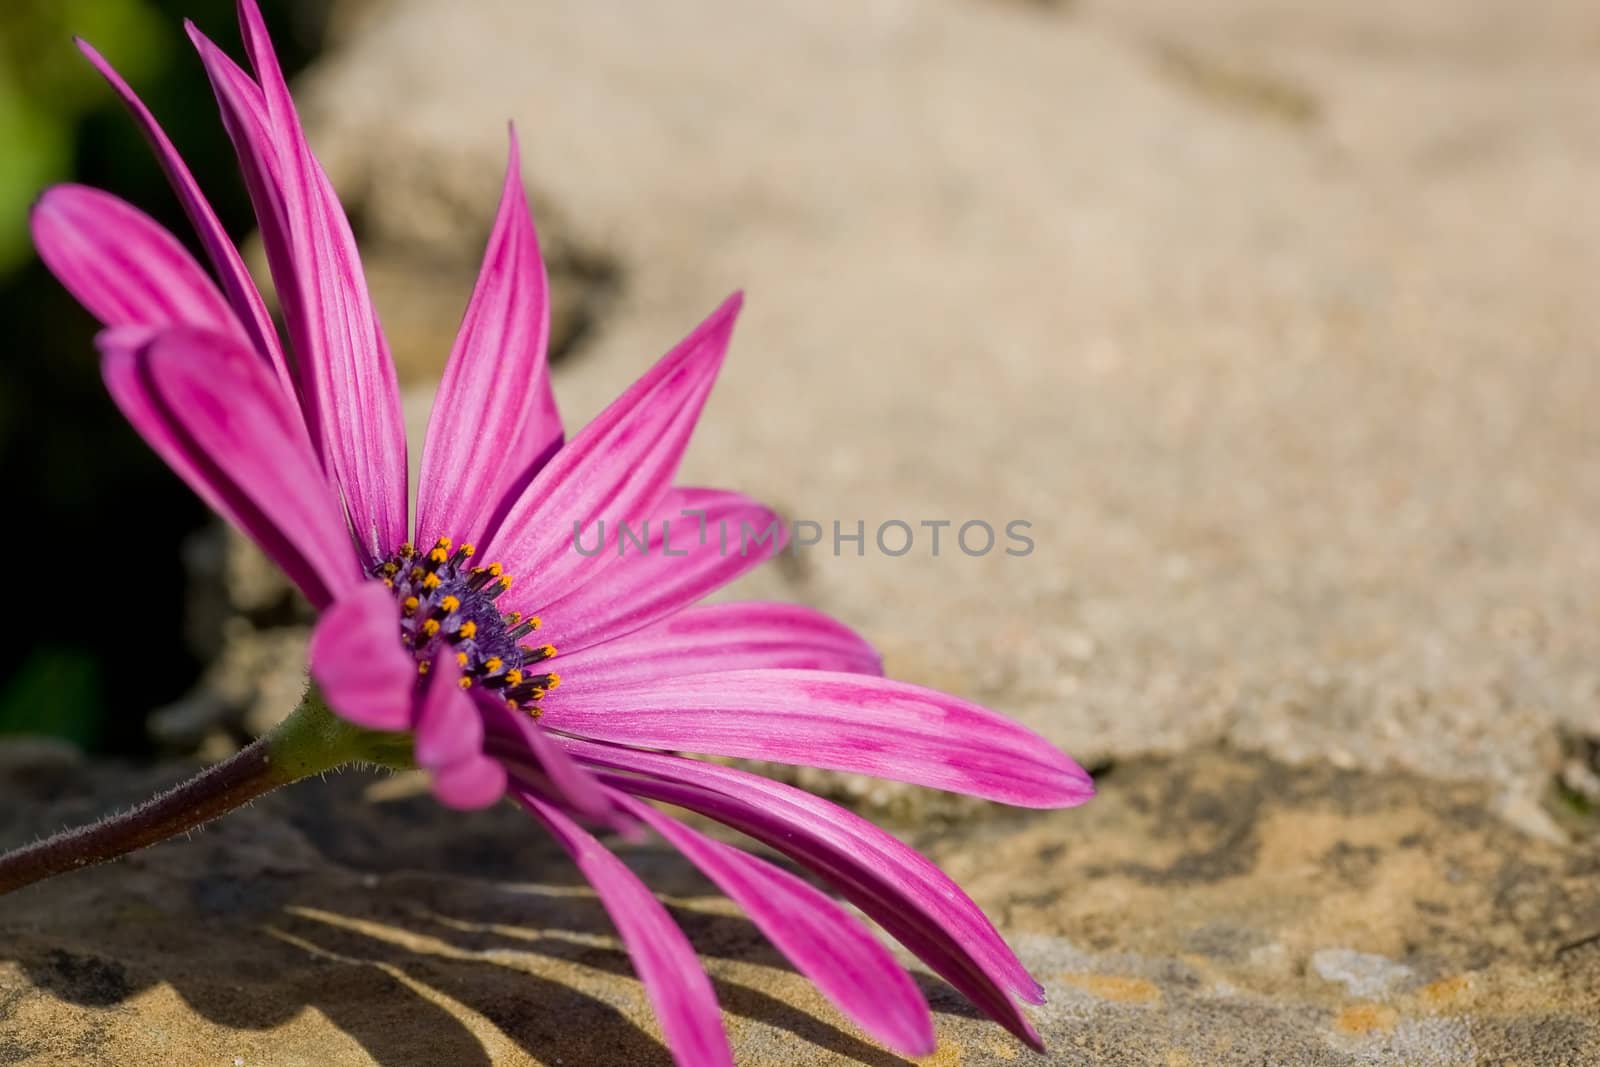 A purple sunscape daisy focussed in the left of the frame, with rock texture background.